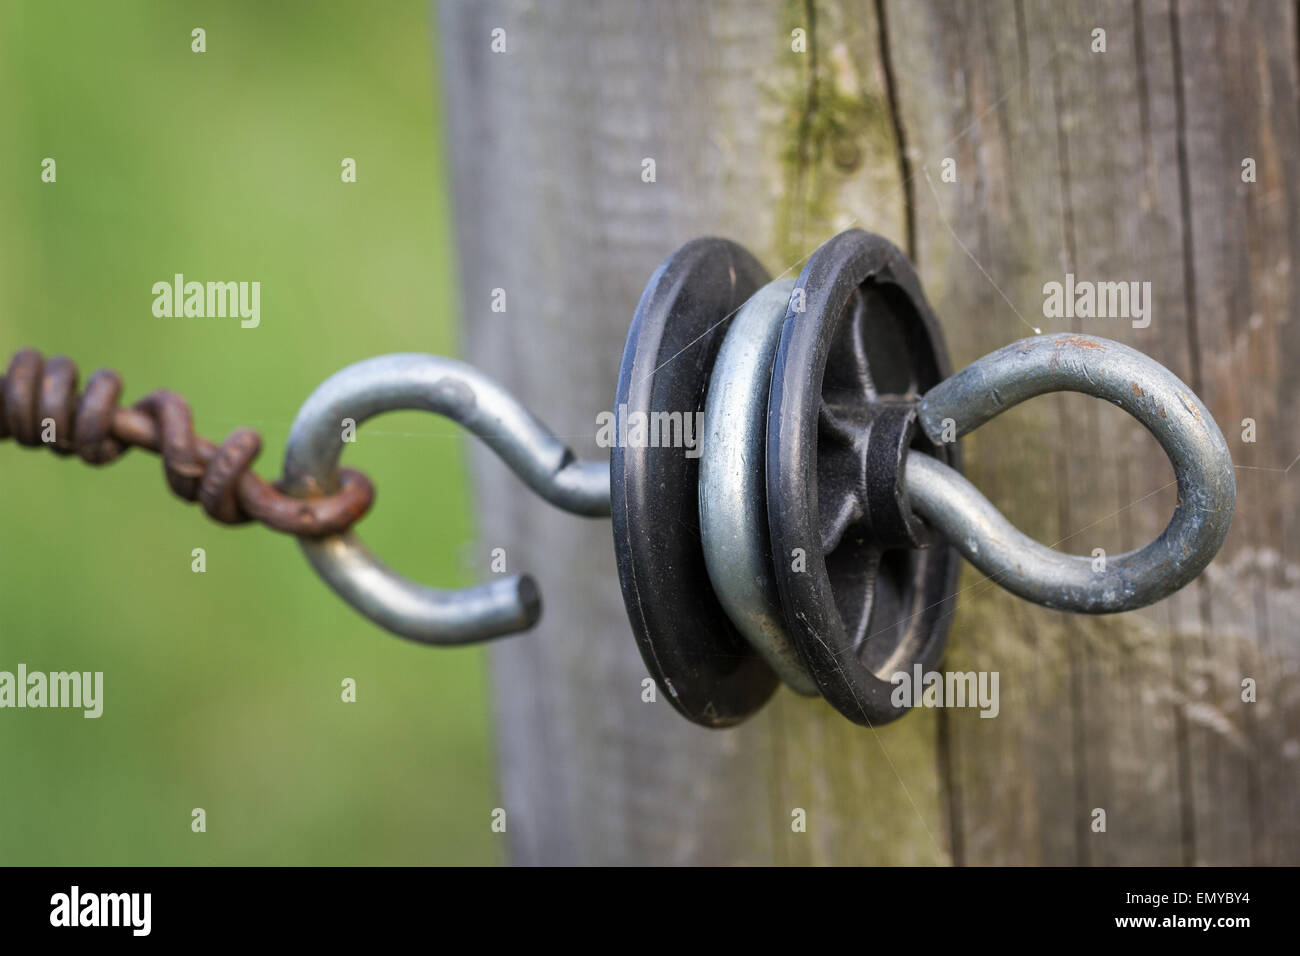 Old electric insulator on a fence post Stock Photo